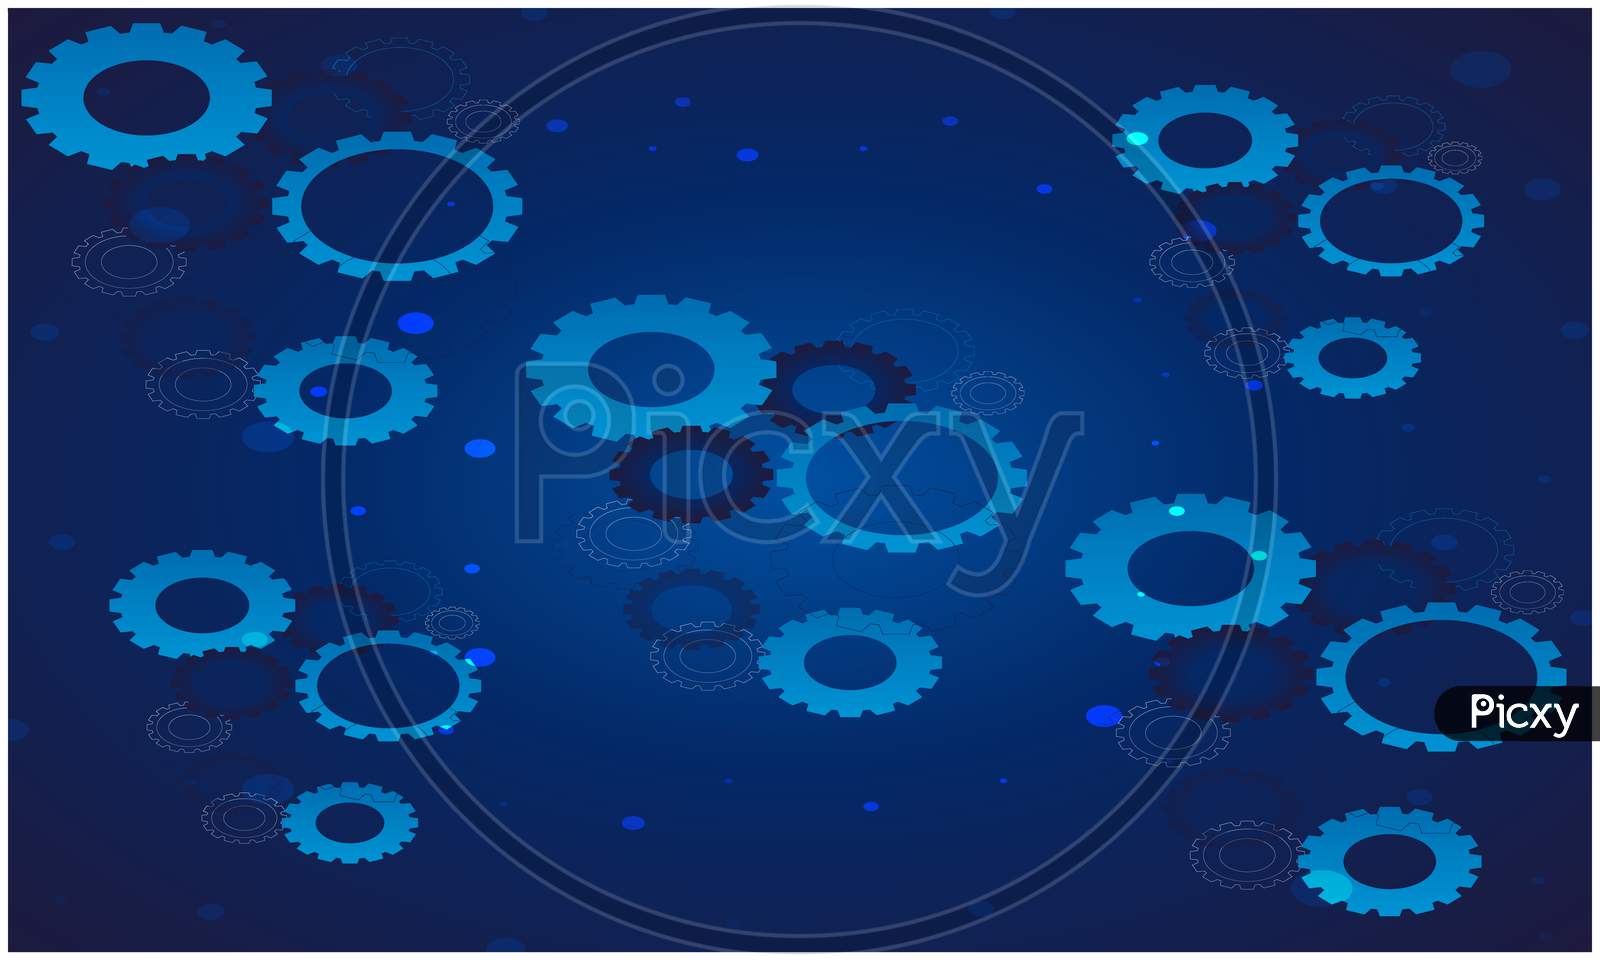 Digital Textile Design Of Several Gears On Abstract Blue Background